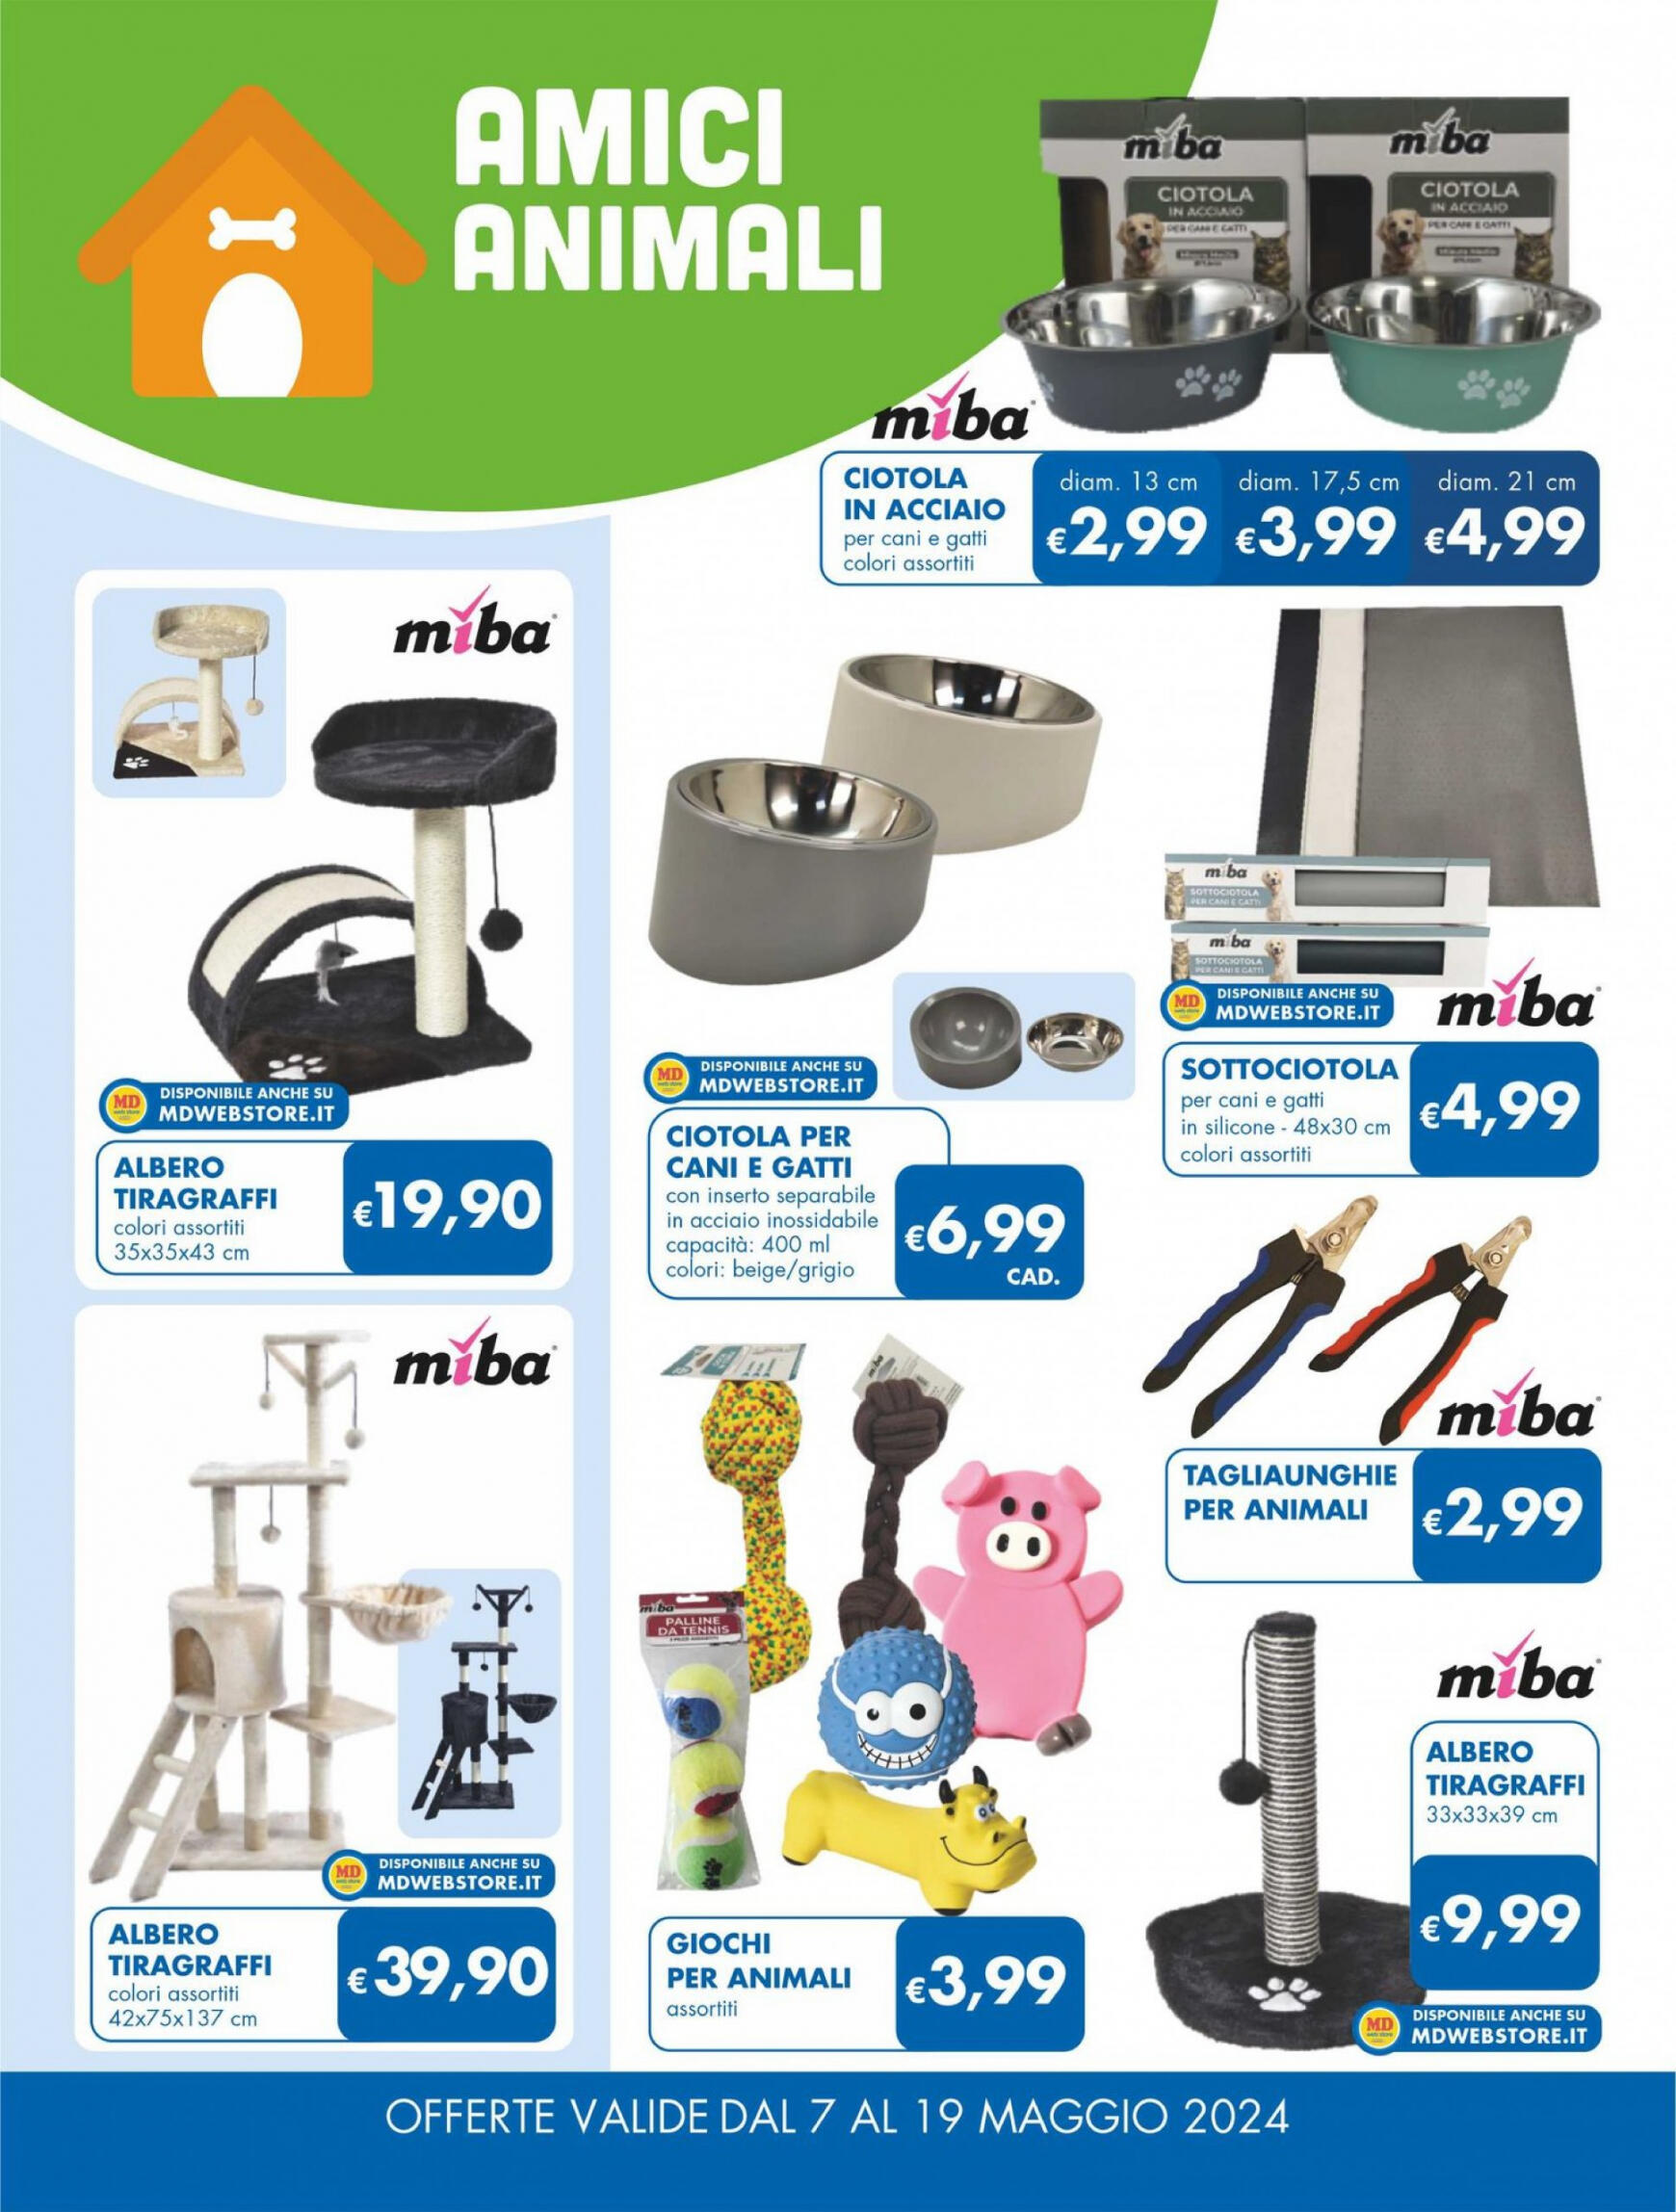 md-discount - Nuovo volantino MD - MD Discount 07.05. - 19.05. - page: 25